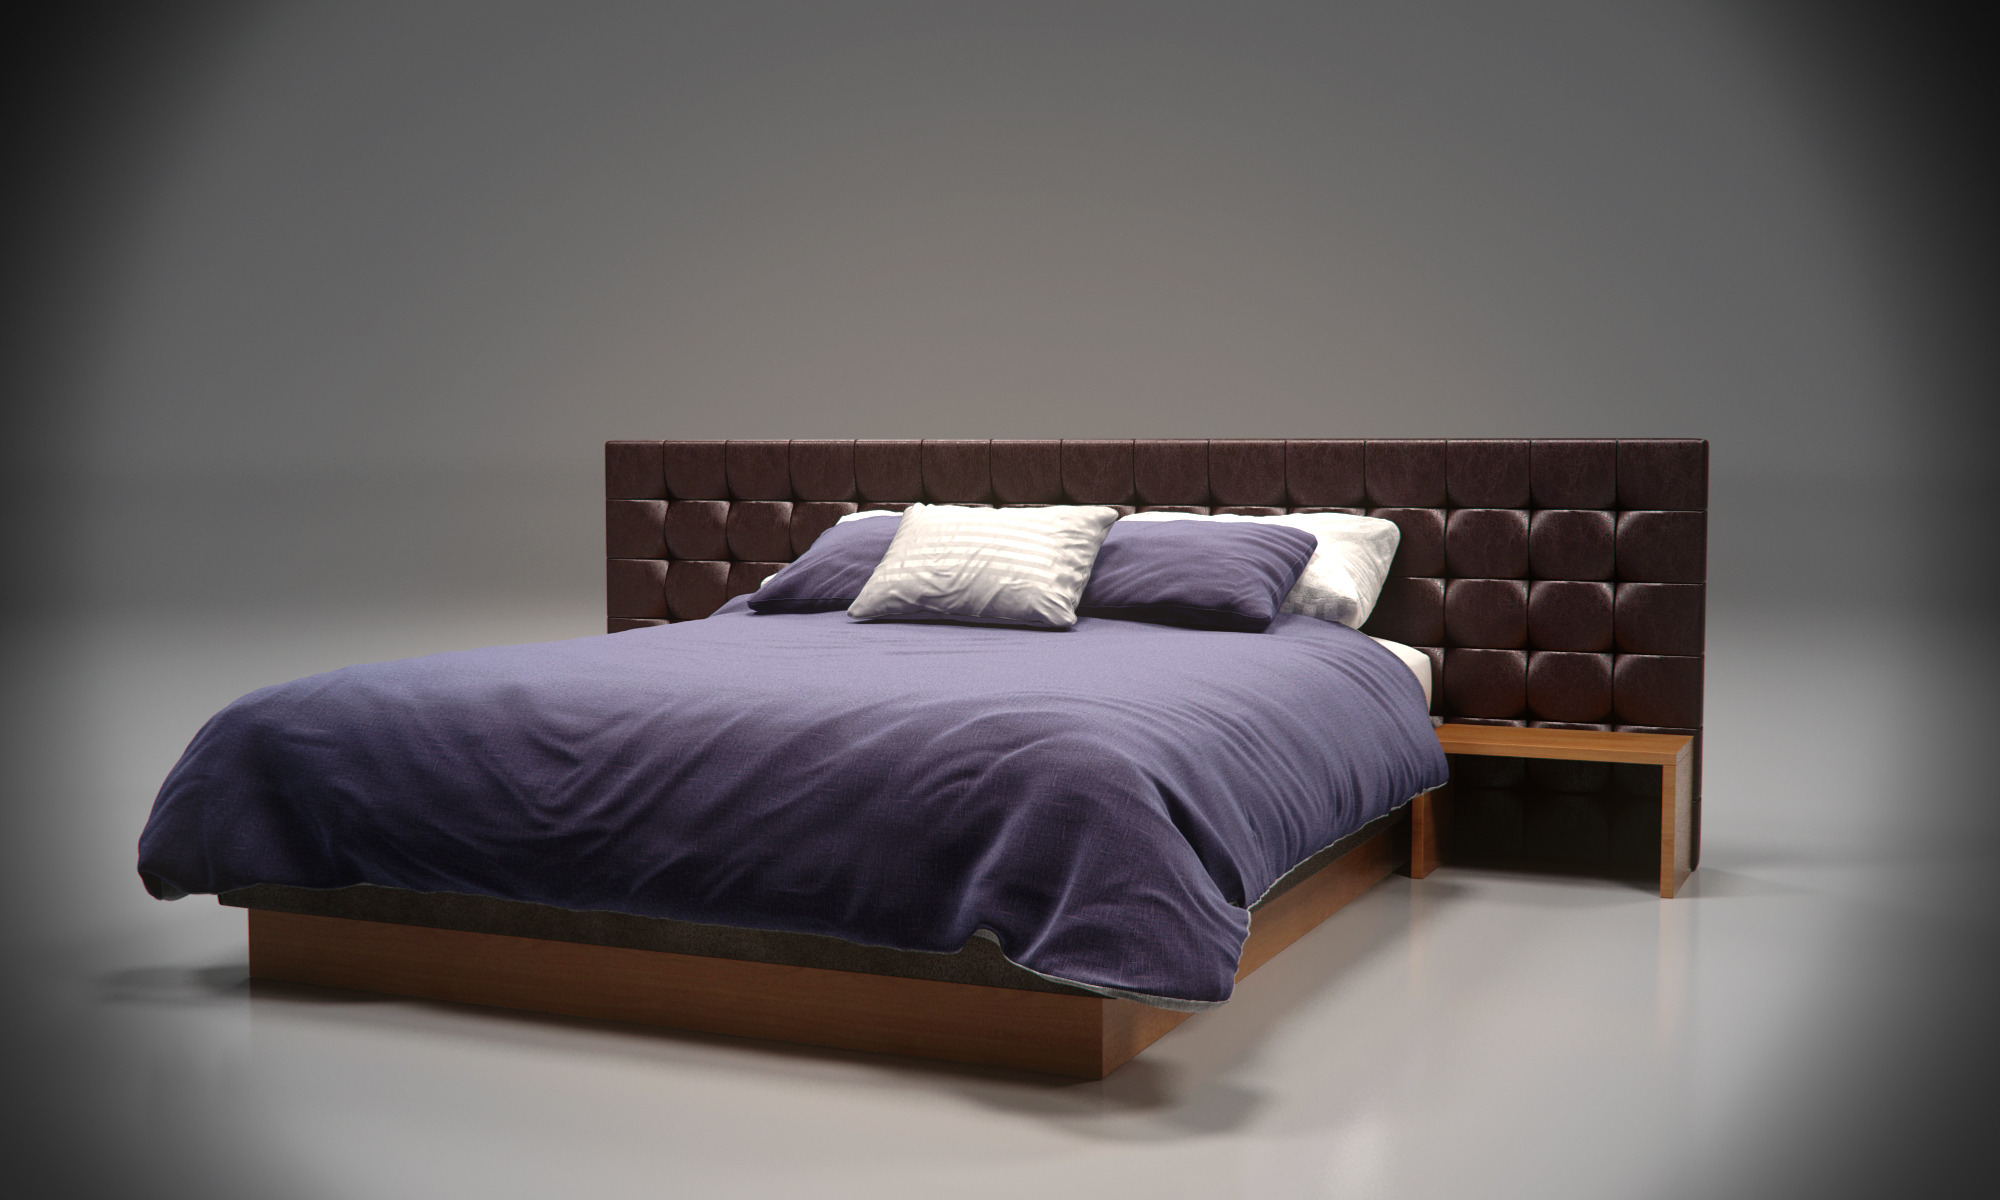 Realistic Bed Model With Materials By Numetal 3docean